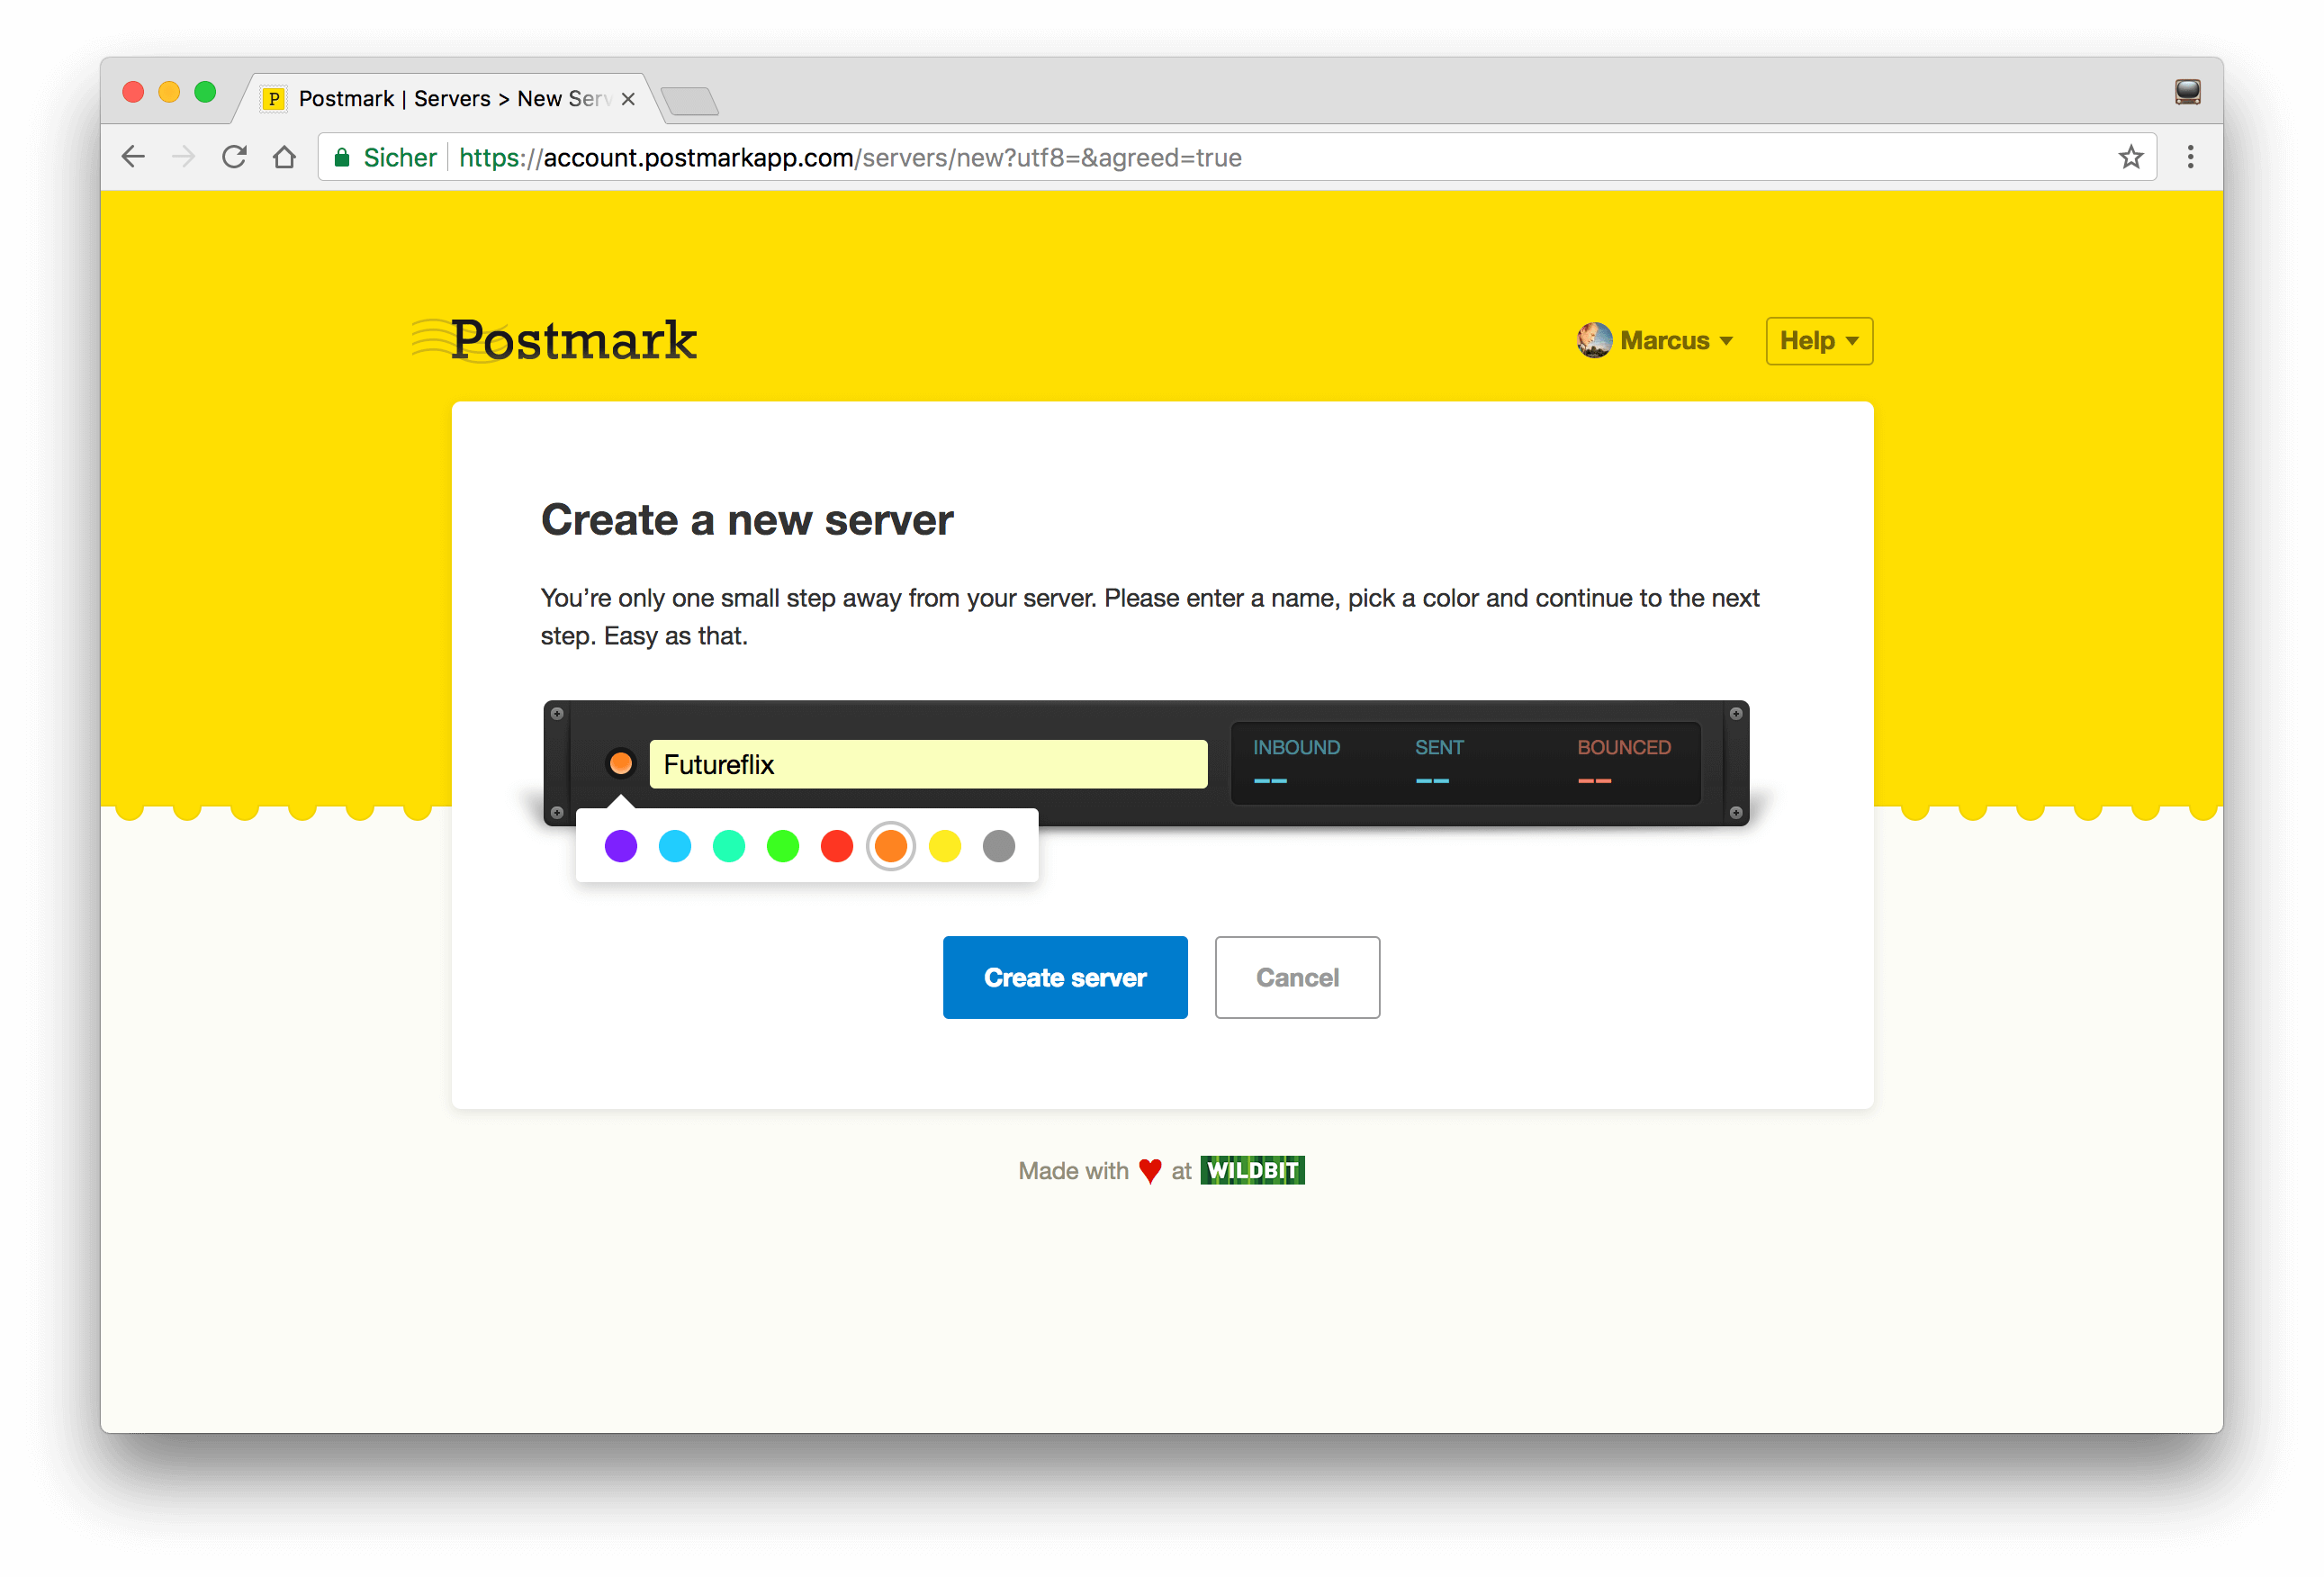 Name your Postmark server and assign a color